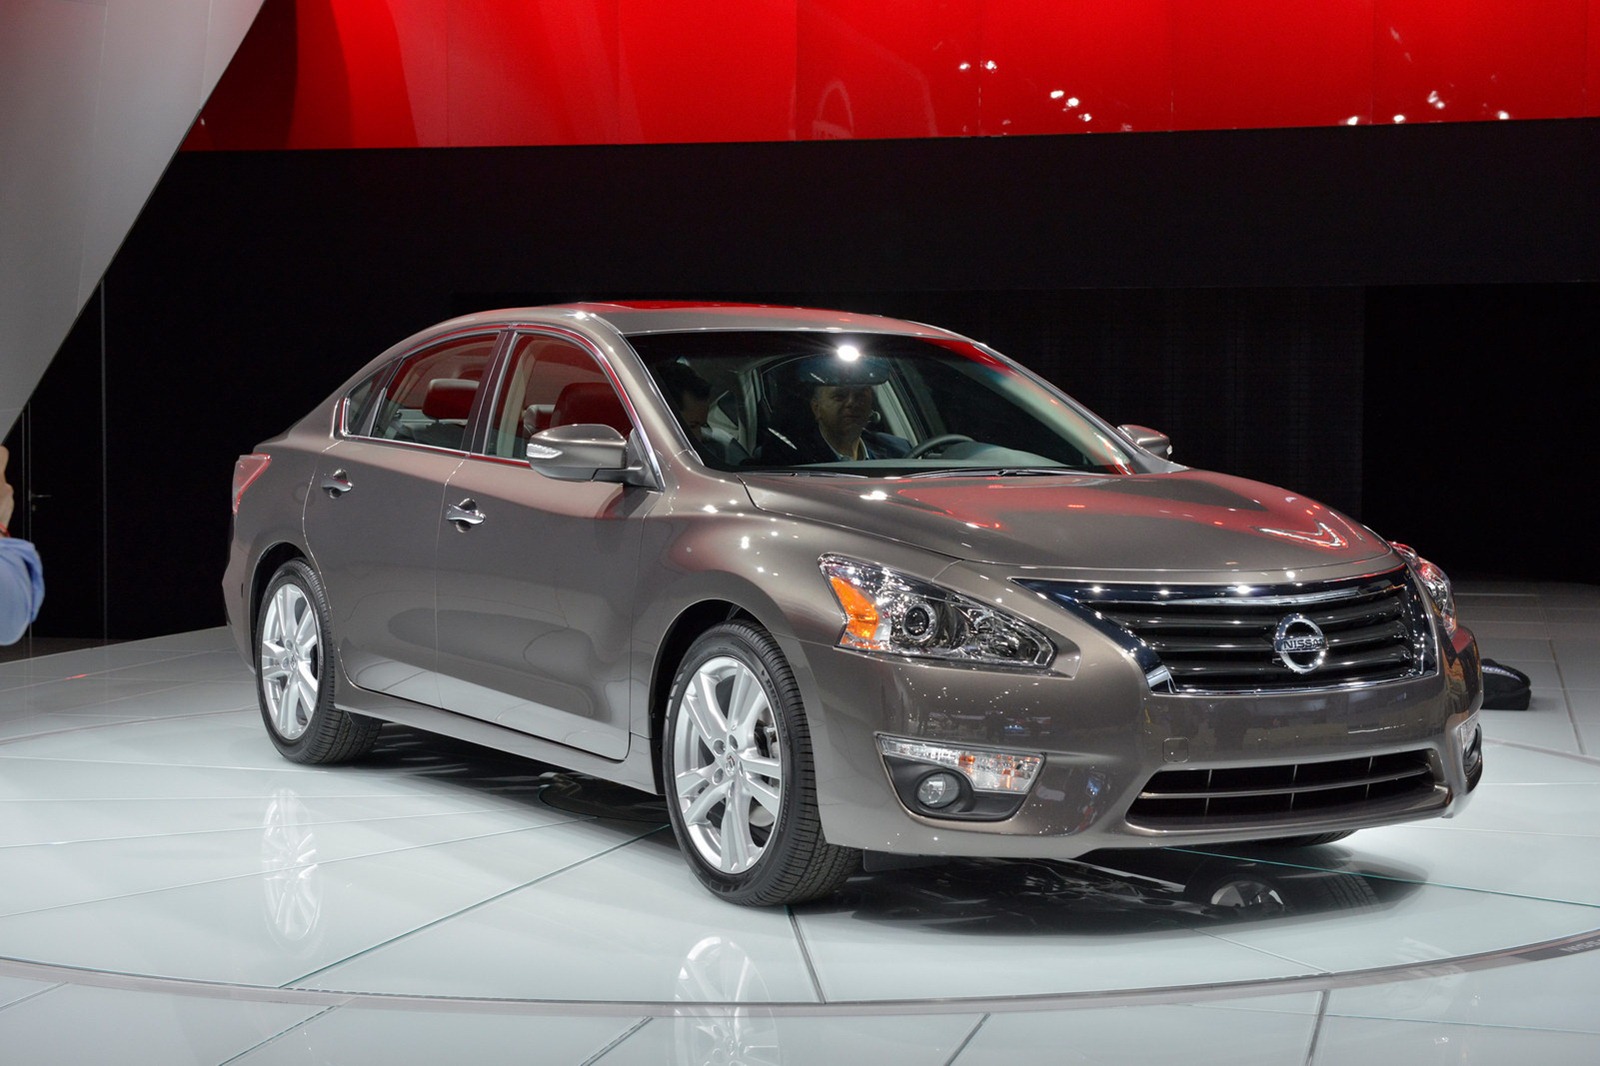 2013 Nissan altima airbags #4